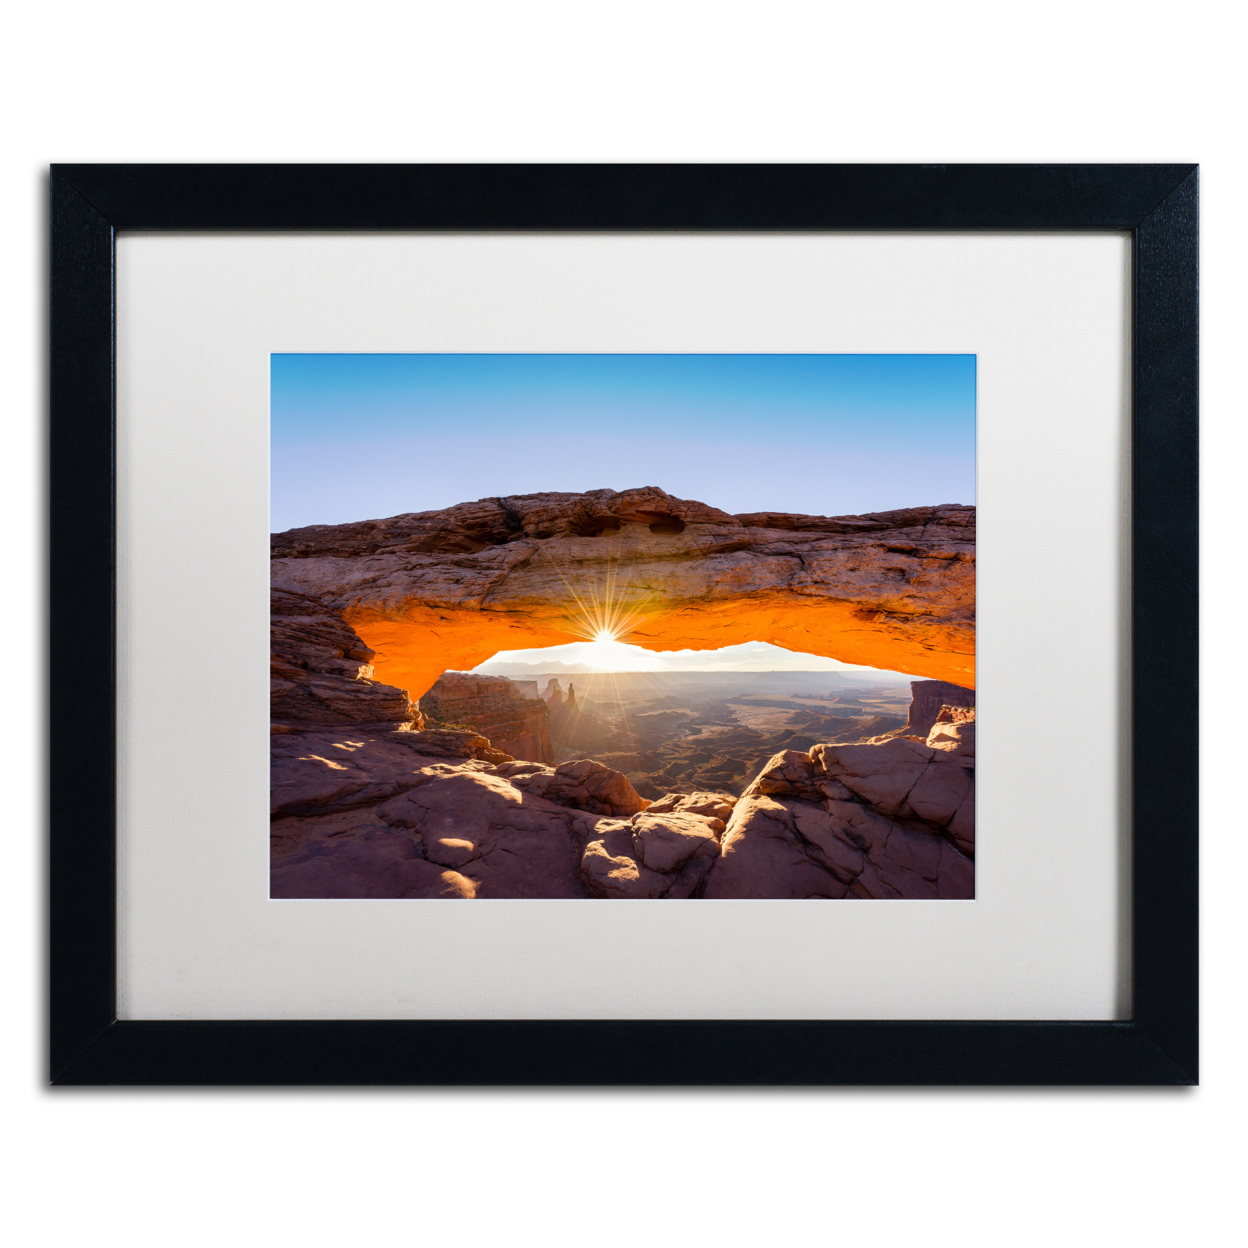 Michael Blanchette Photography 'Lighted Frame' Black Wooden Framed Art 18 X 22 Inches